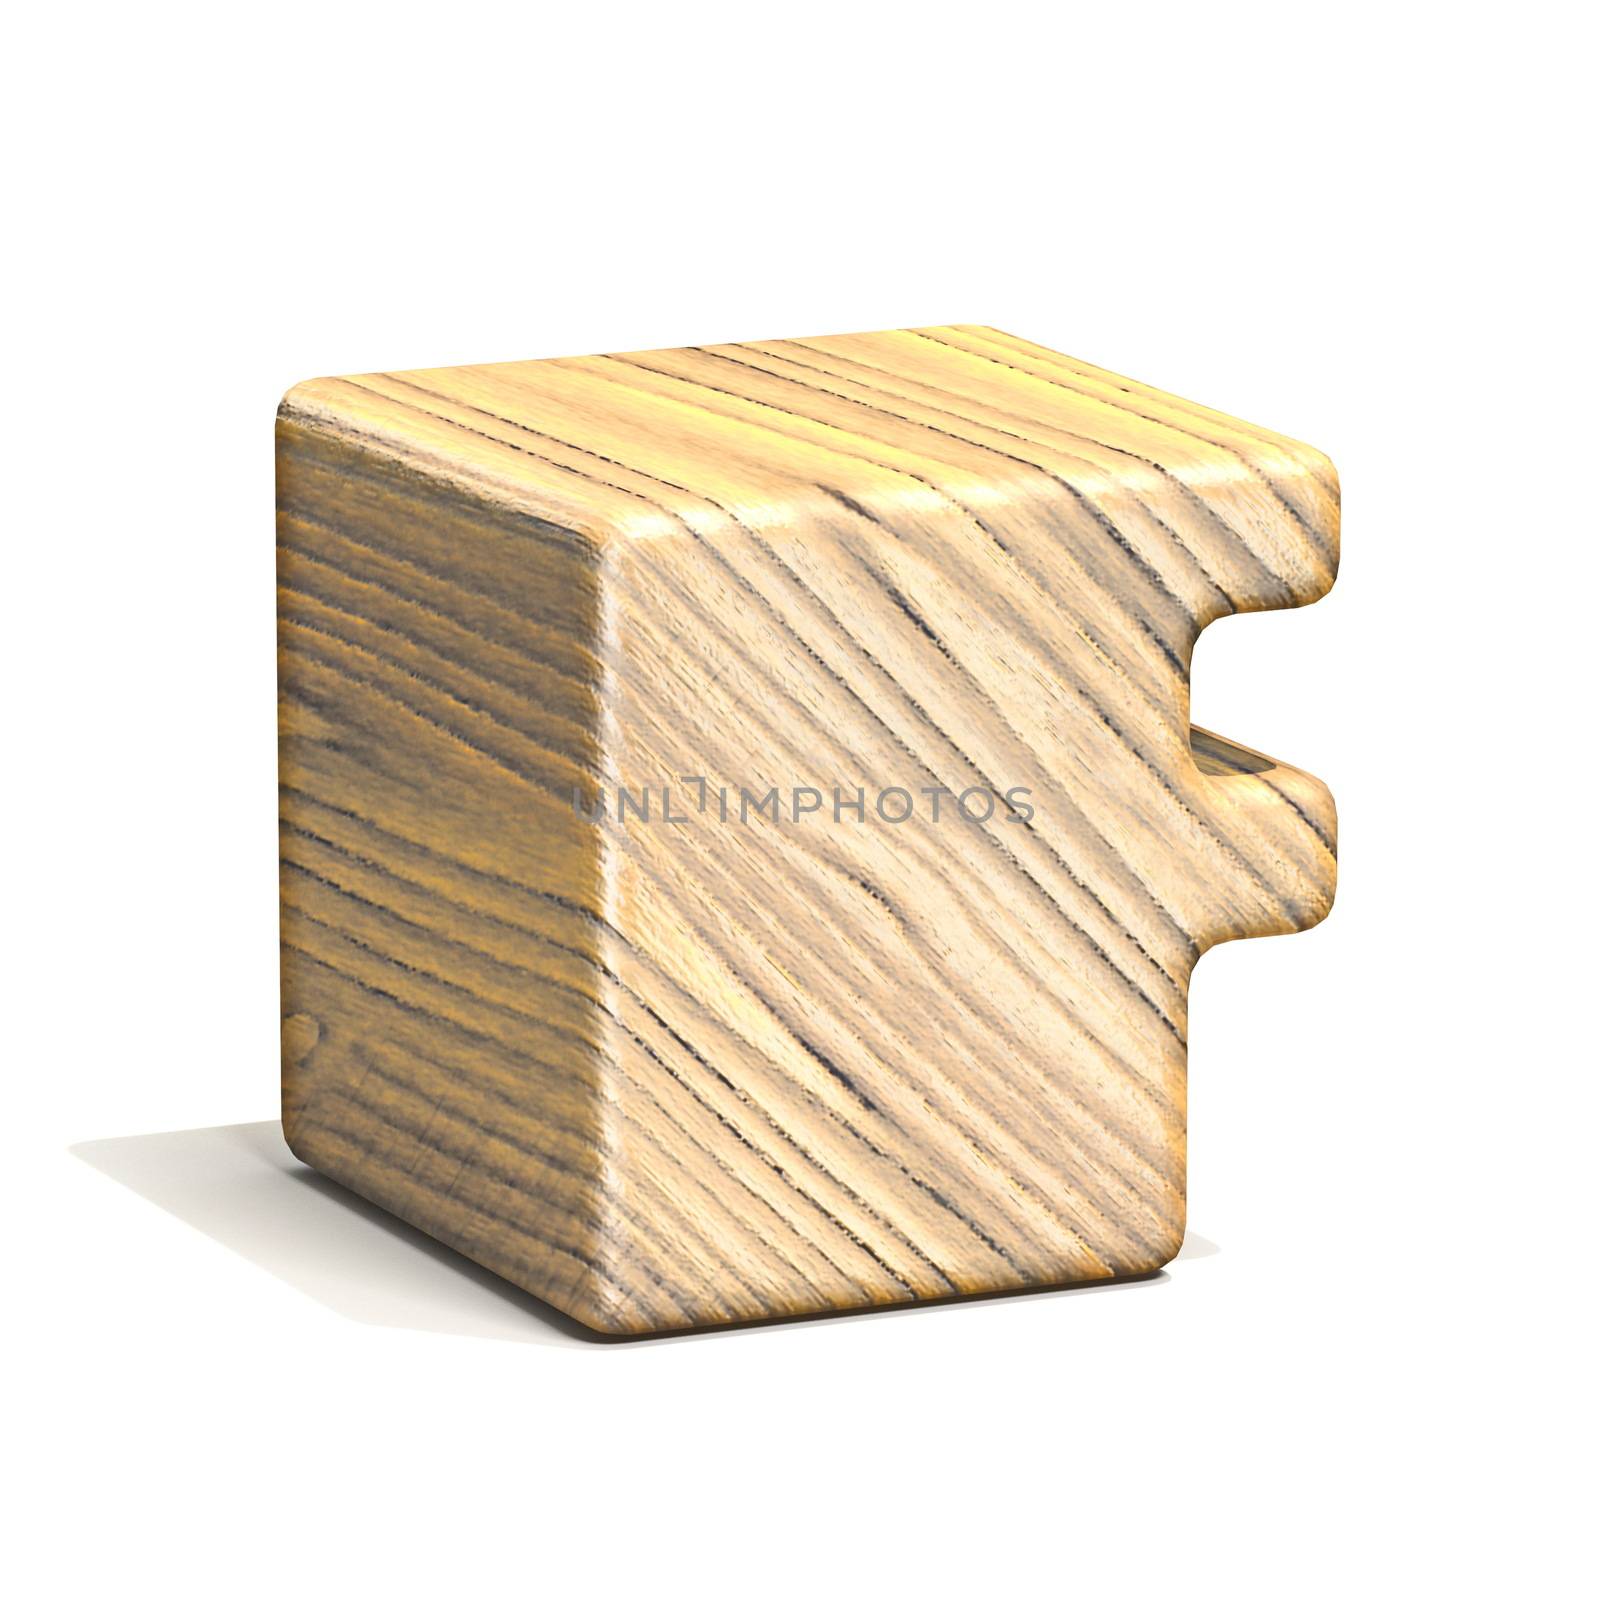 Solid wooden cube font Letter F 3D render illustration isolated on white background